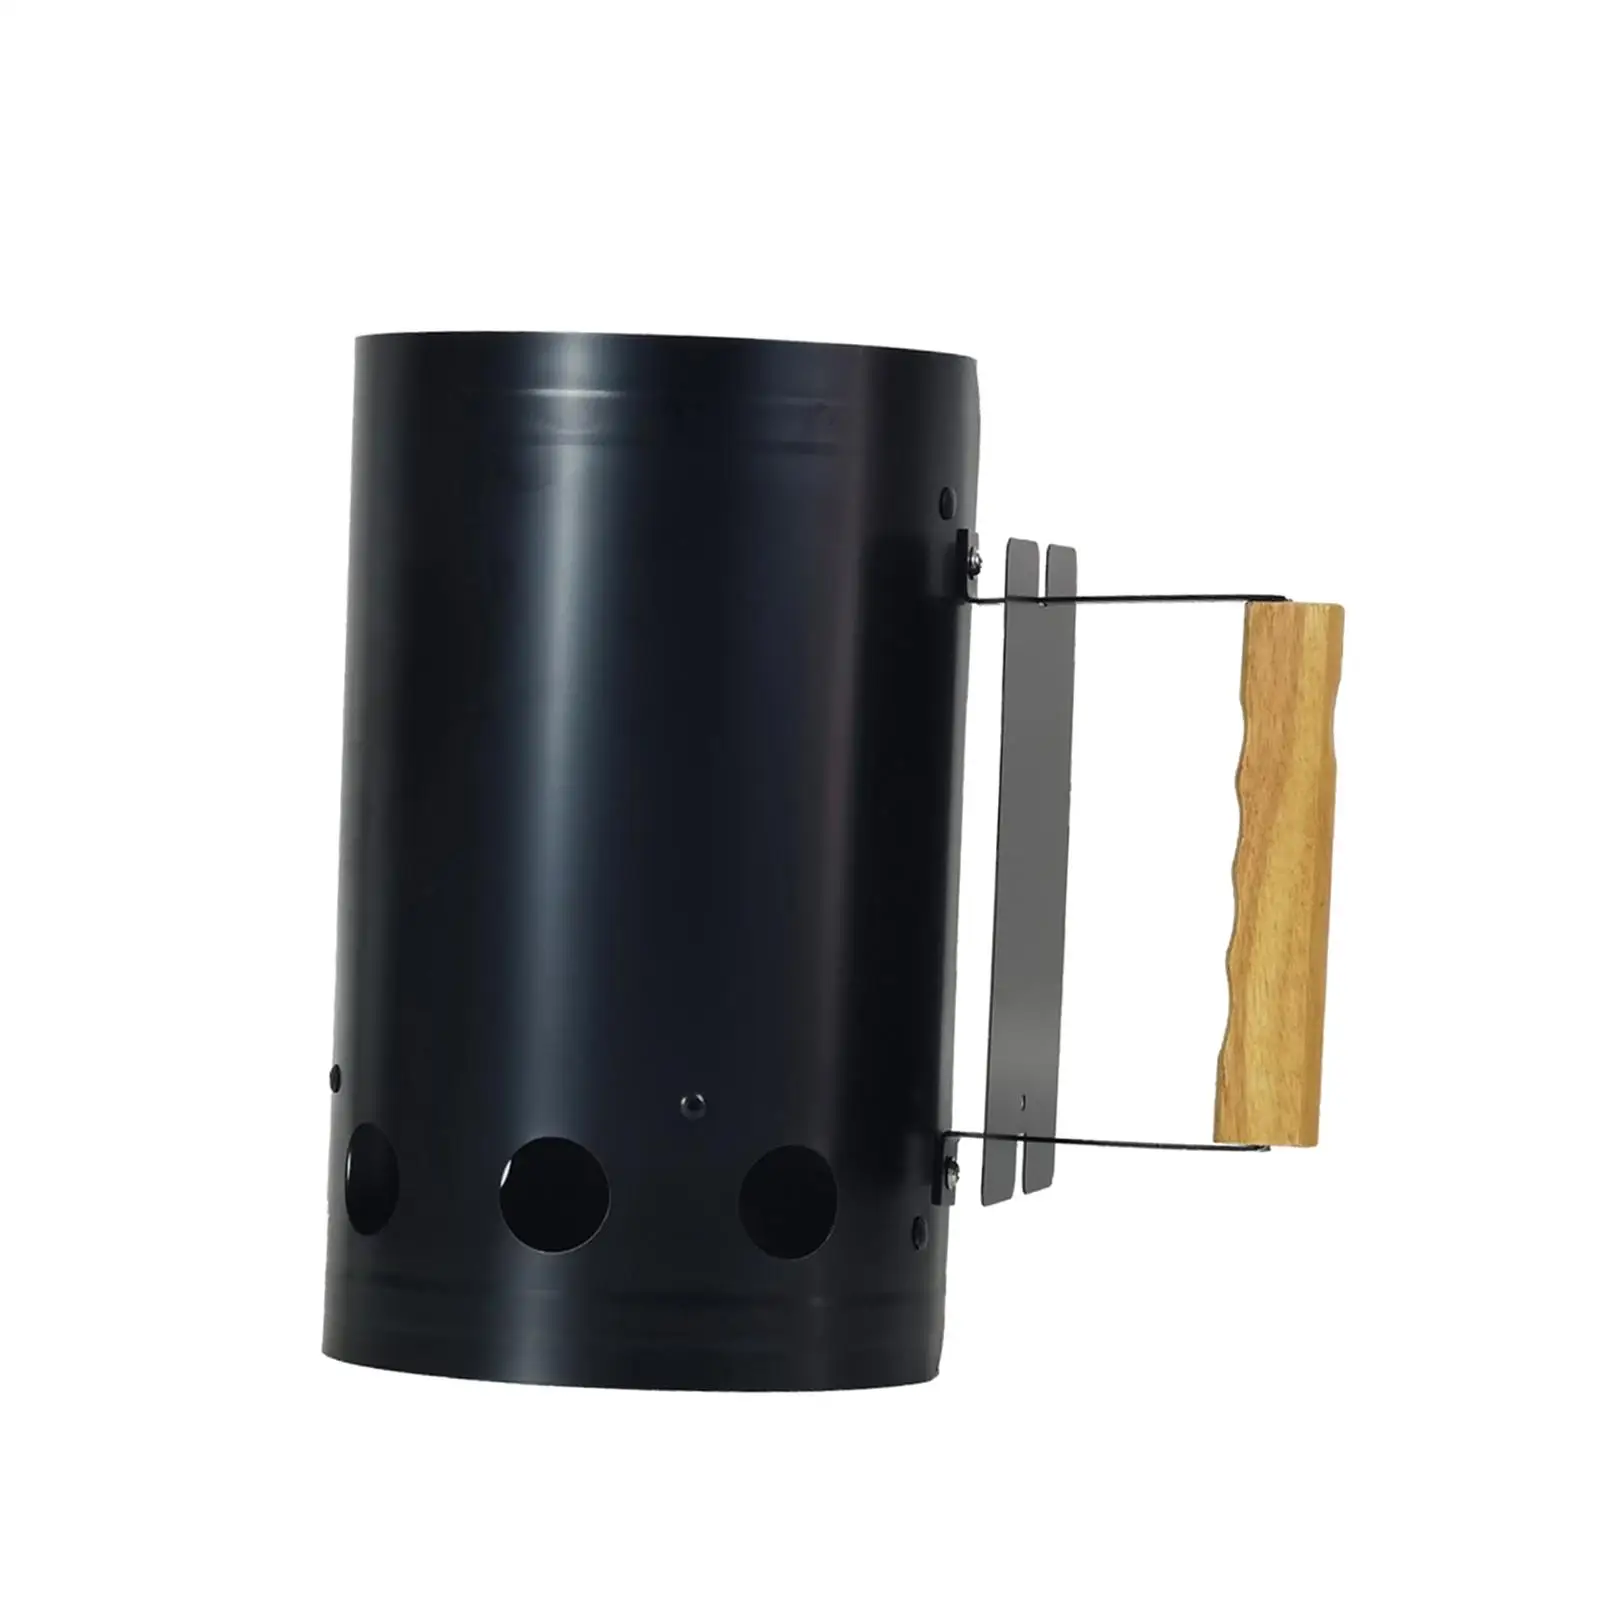 BBQ Barbecue Chimney Starter Outdoor Cooking for Cooking